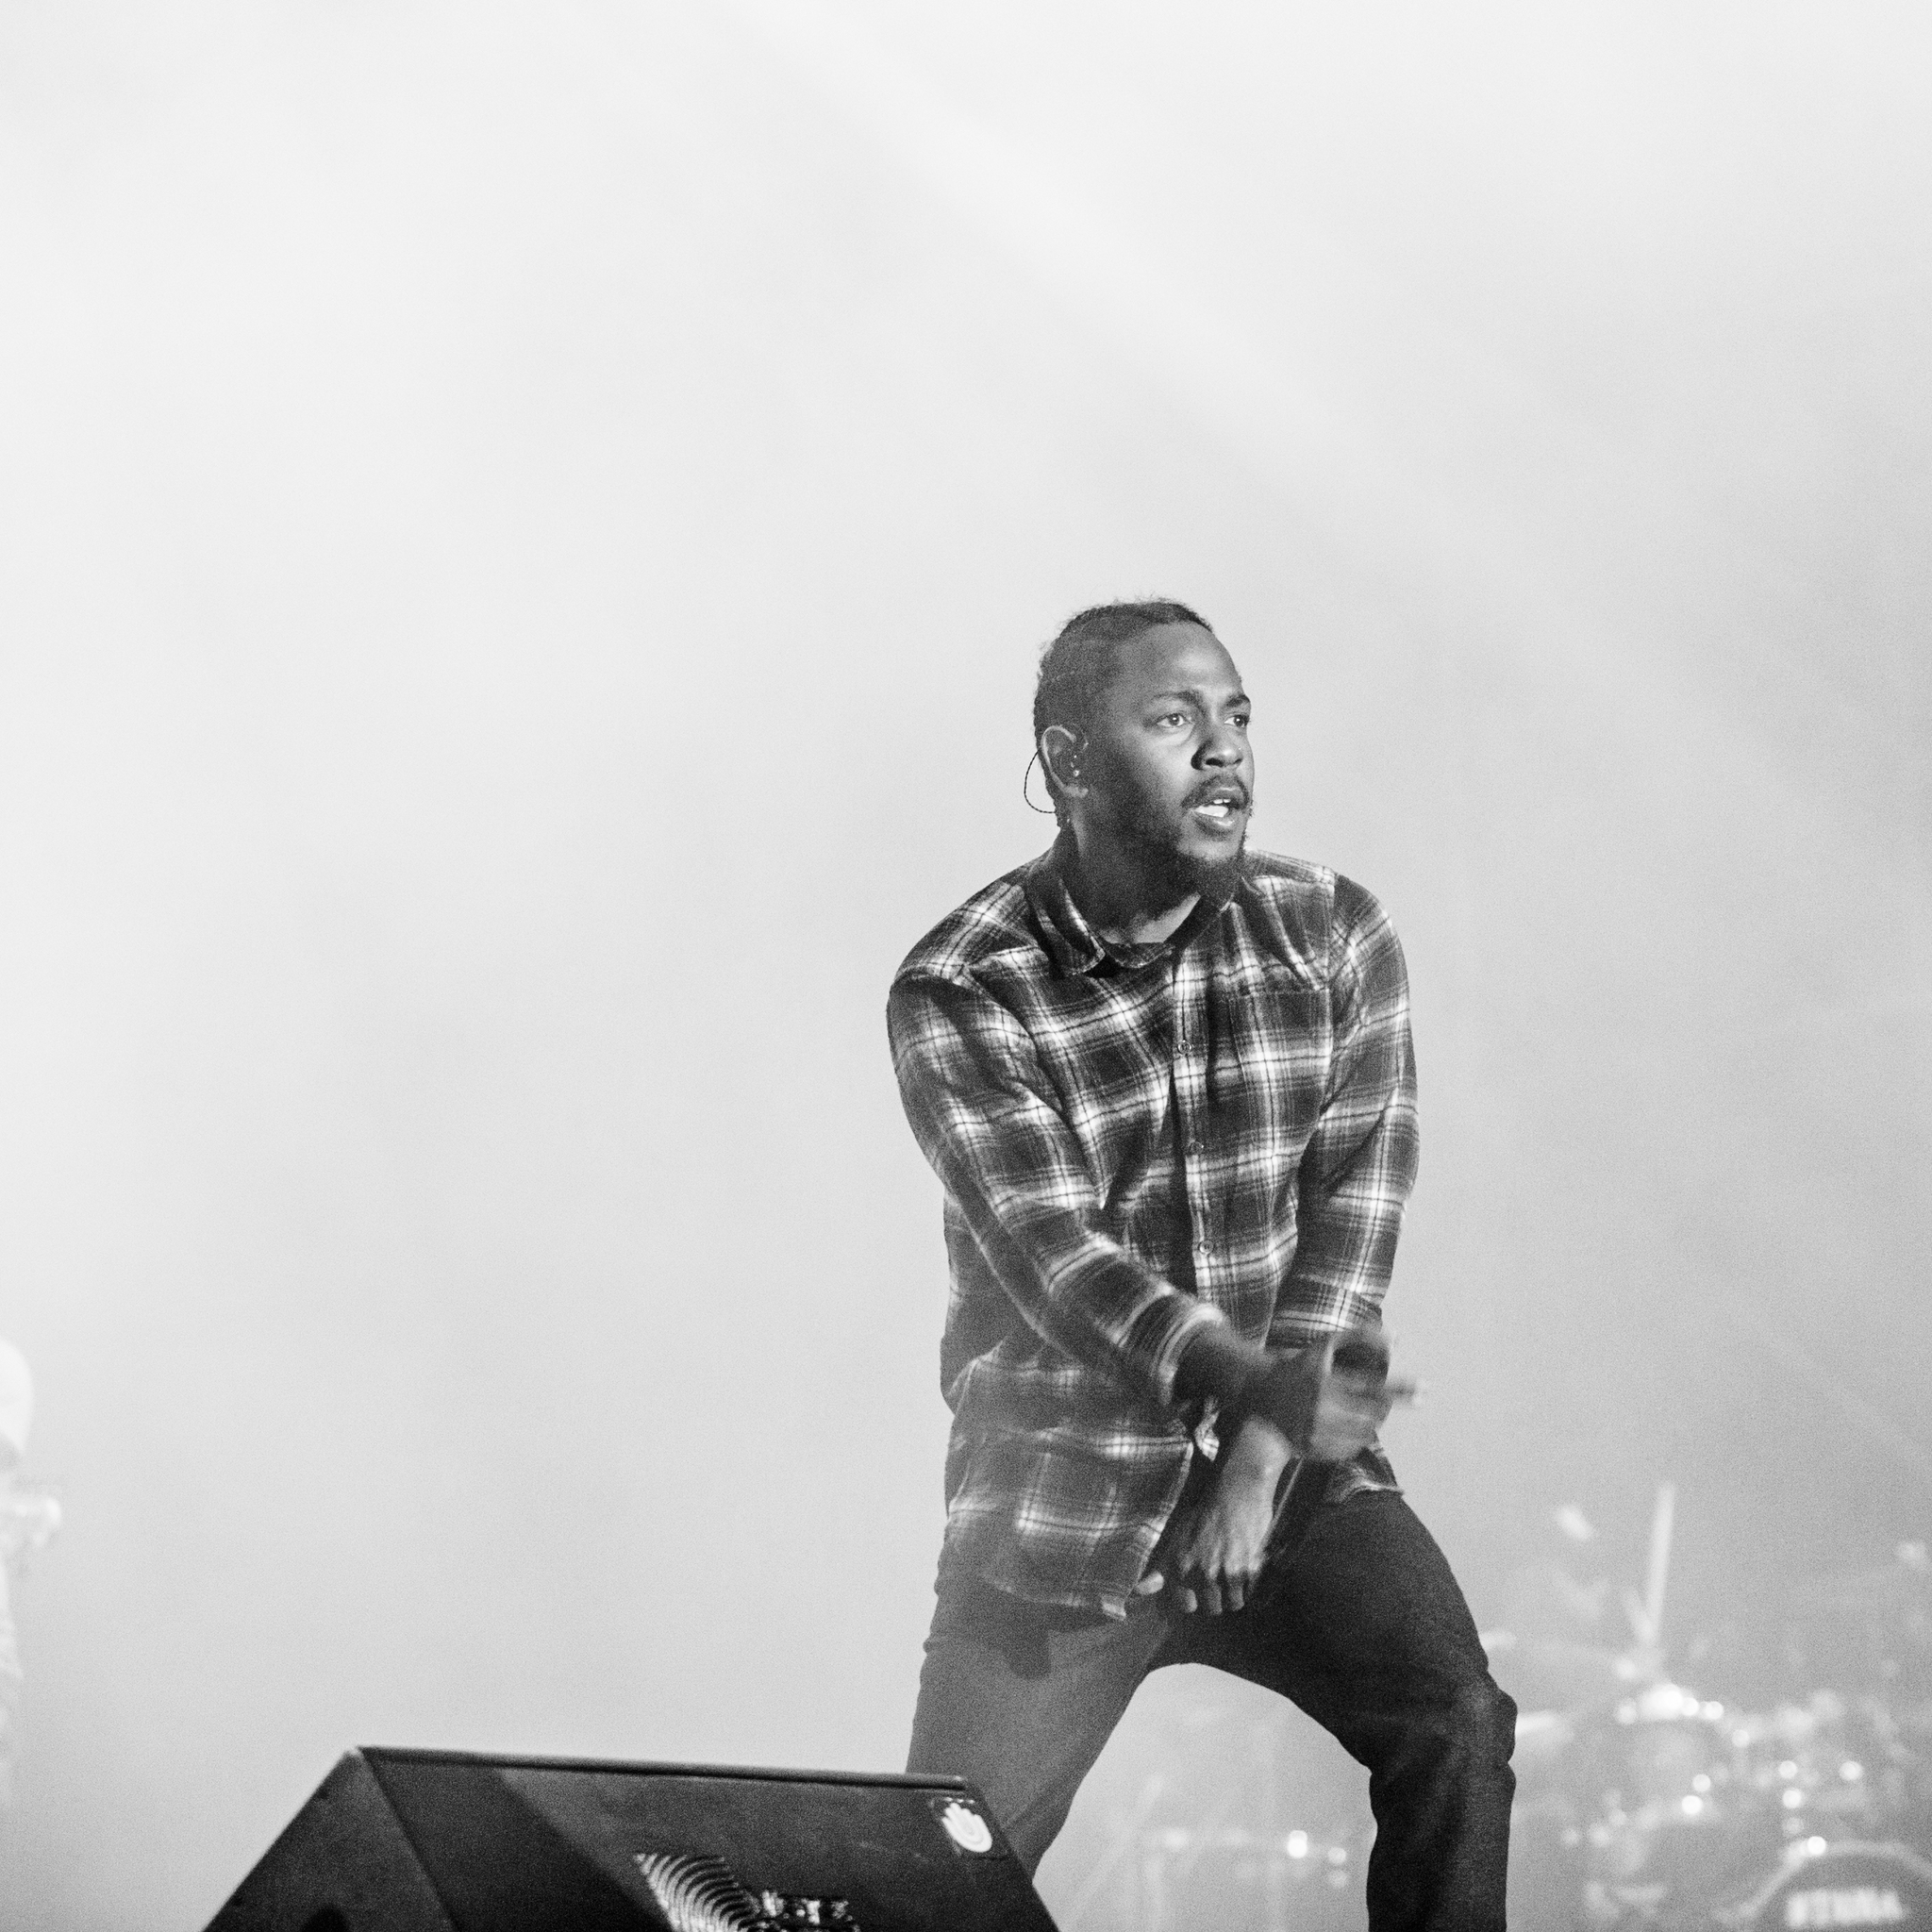 X kendrick lamar monochrome ipad air hd k wallpapers images backgrounds photos and pictures